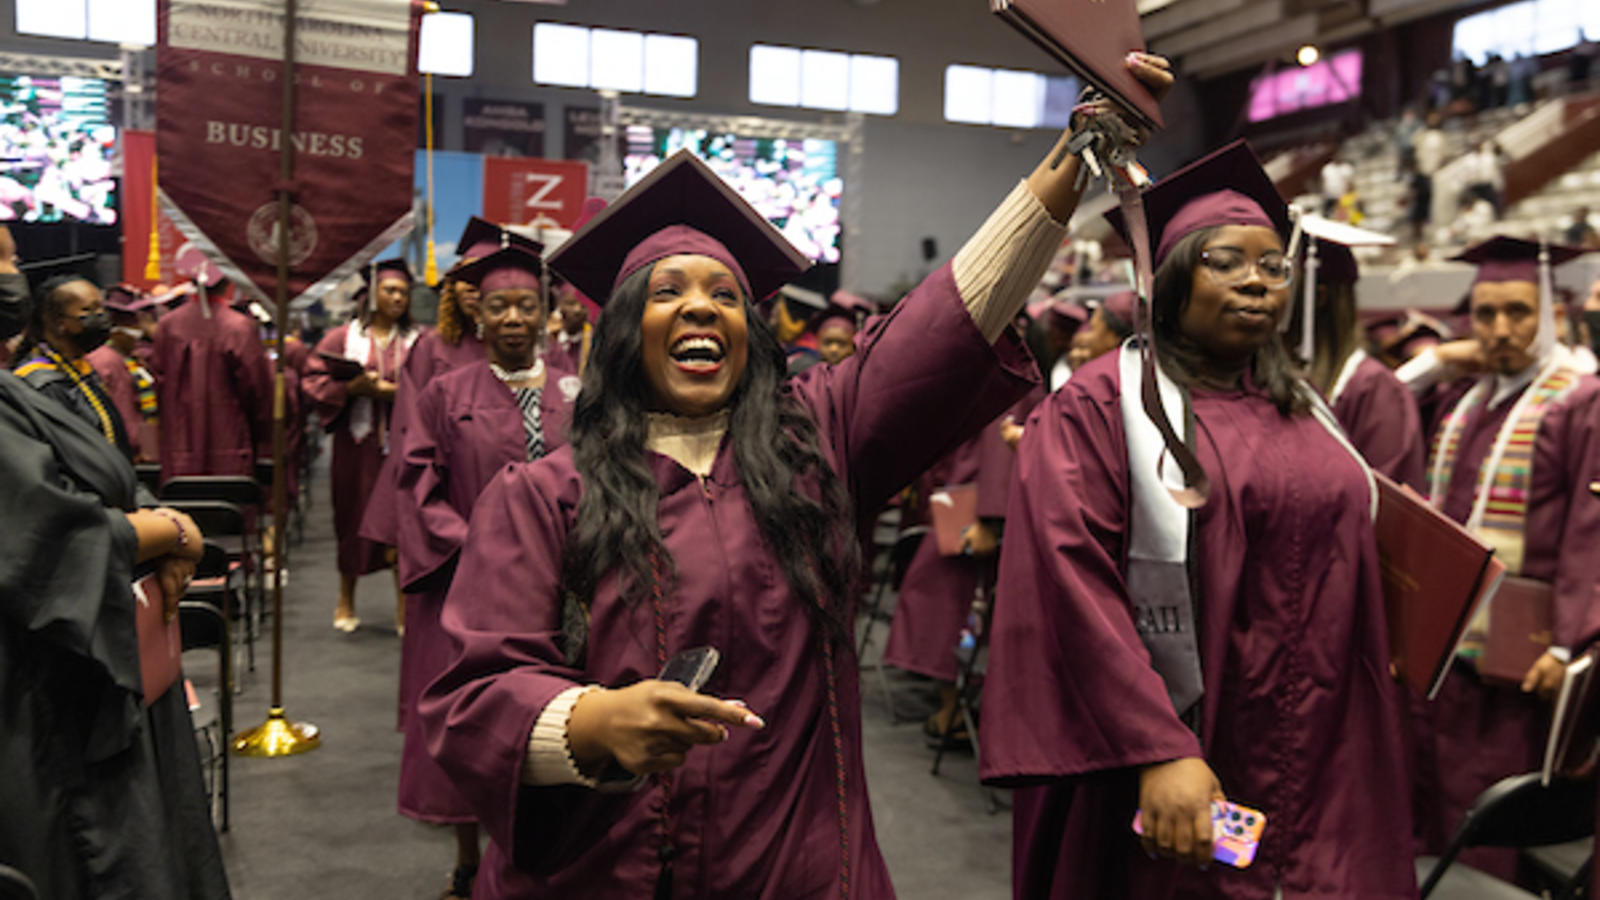 Procession of NCCU graduates at commencement. Woman in foreground is smiling.